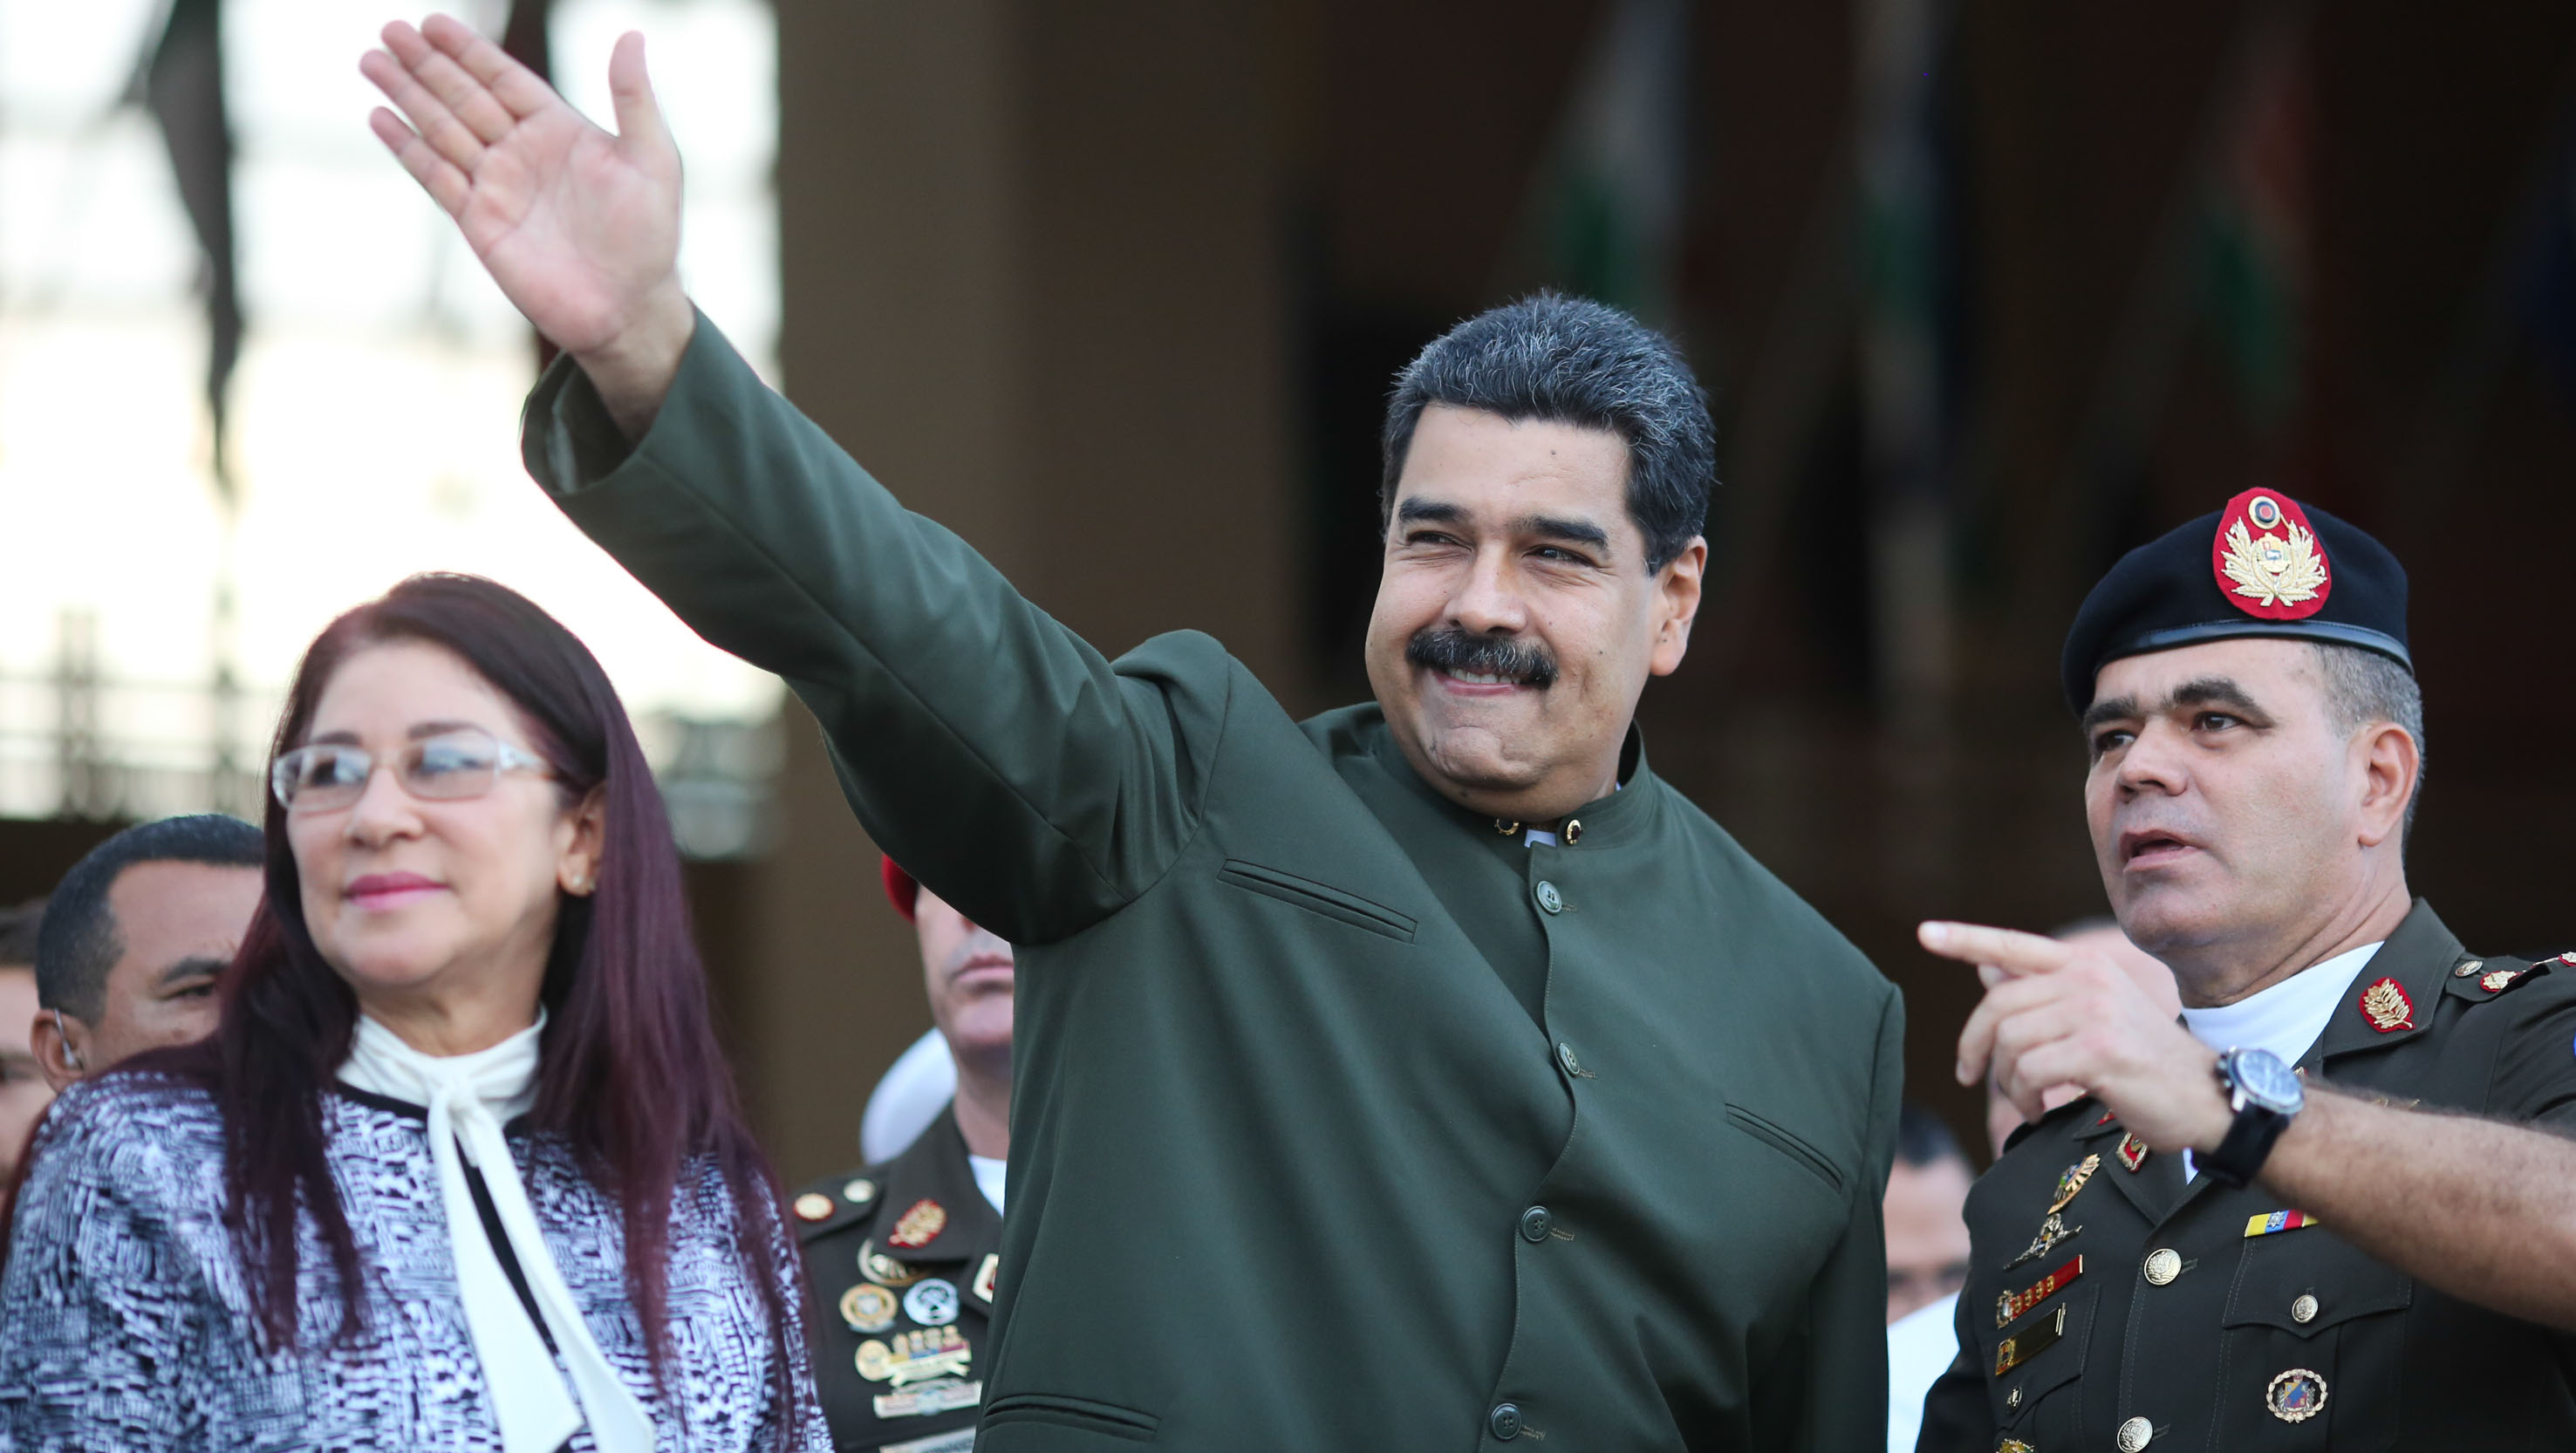 Venezuelan leaders including President Nicolas Maduro have been subject to an intense international media campaign.